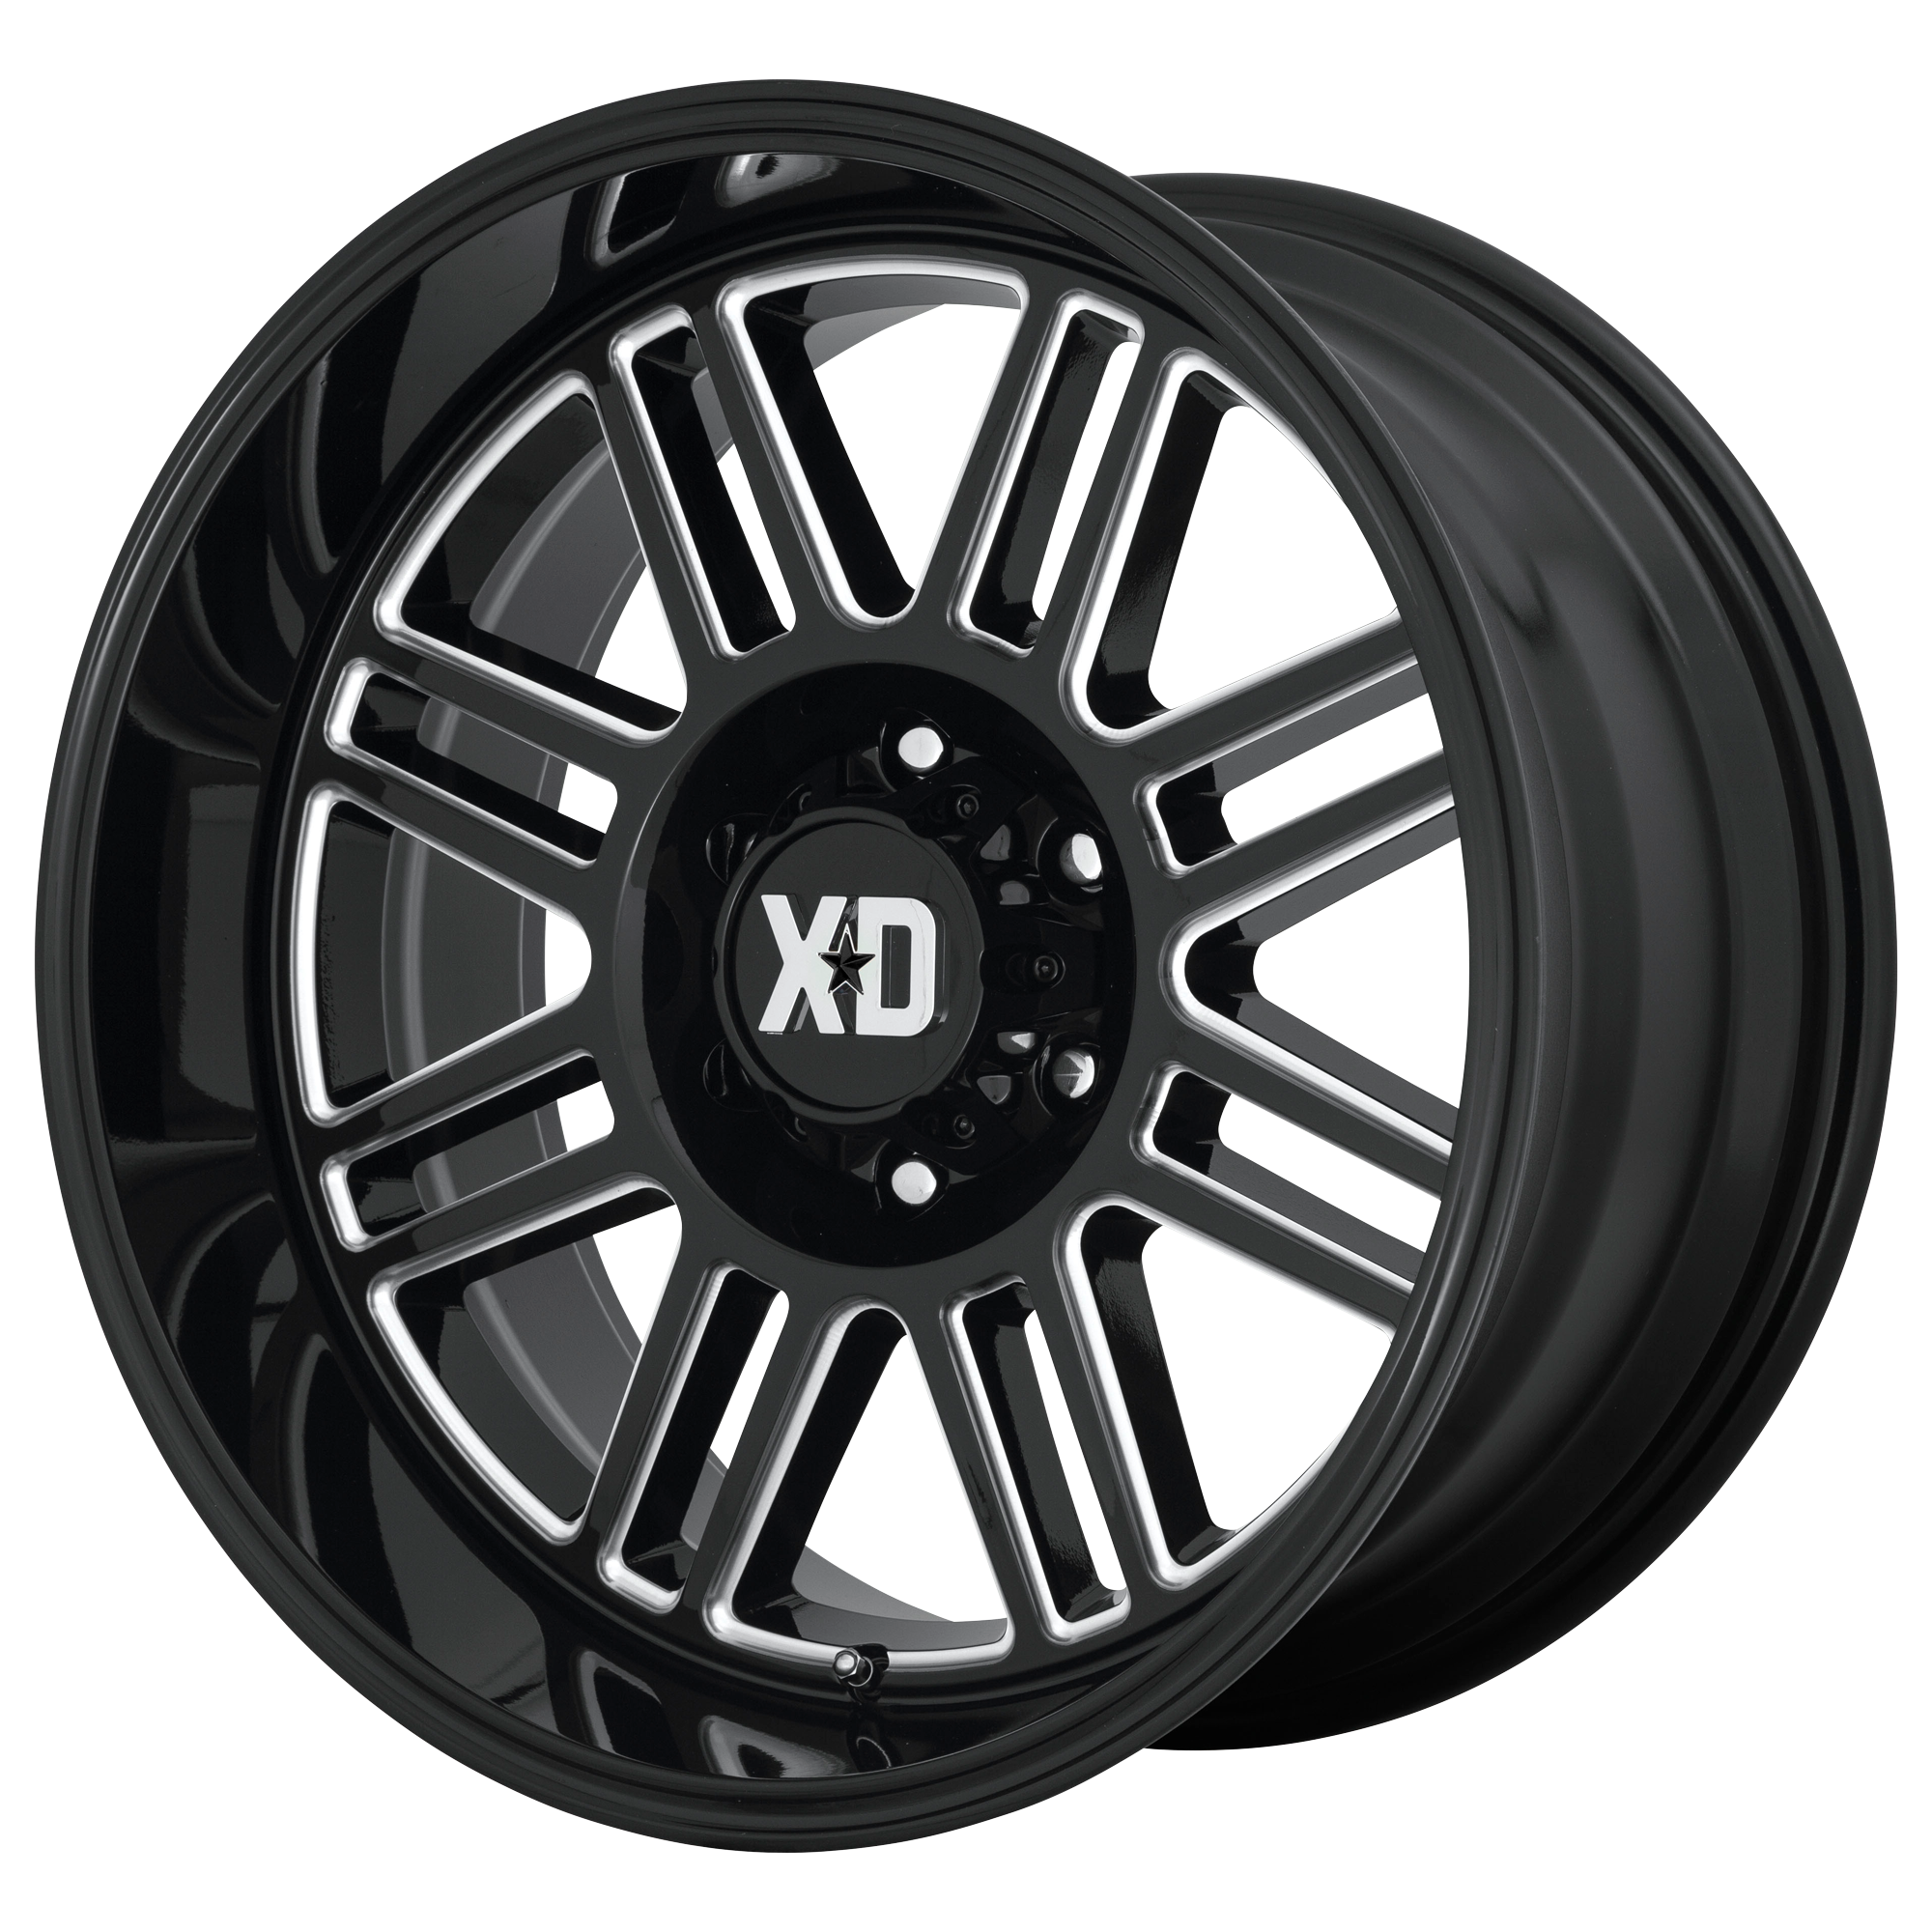 CAGE 20x10 6x139.70 GLOSS BLACK MILLED (-18 mm) - Tires and Engine Performance